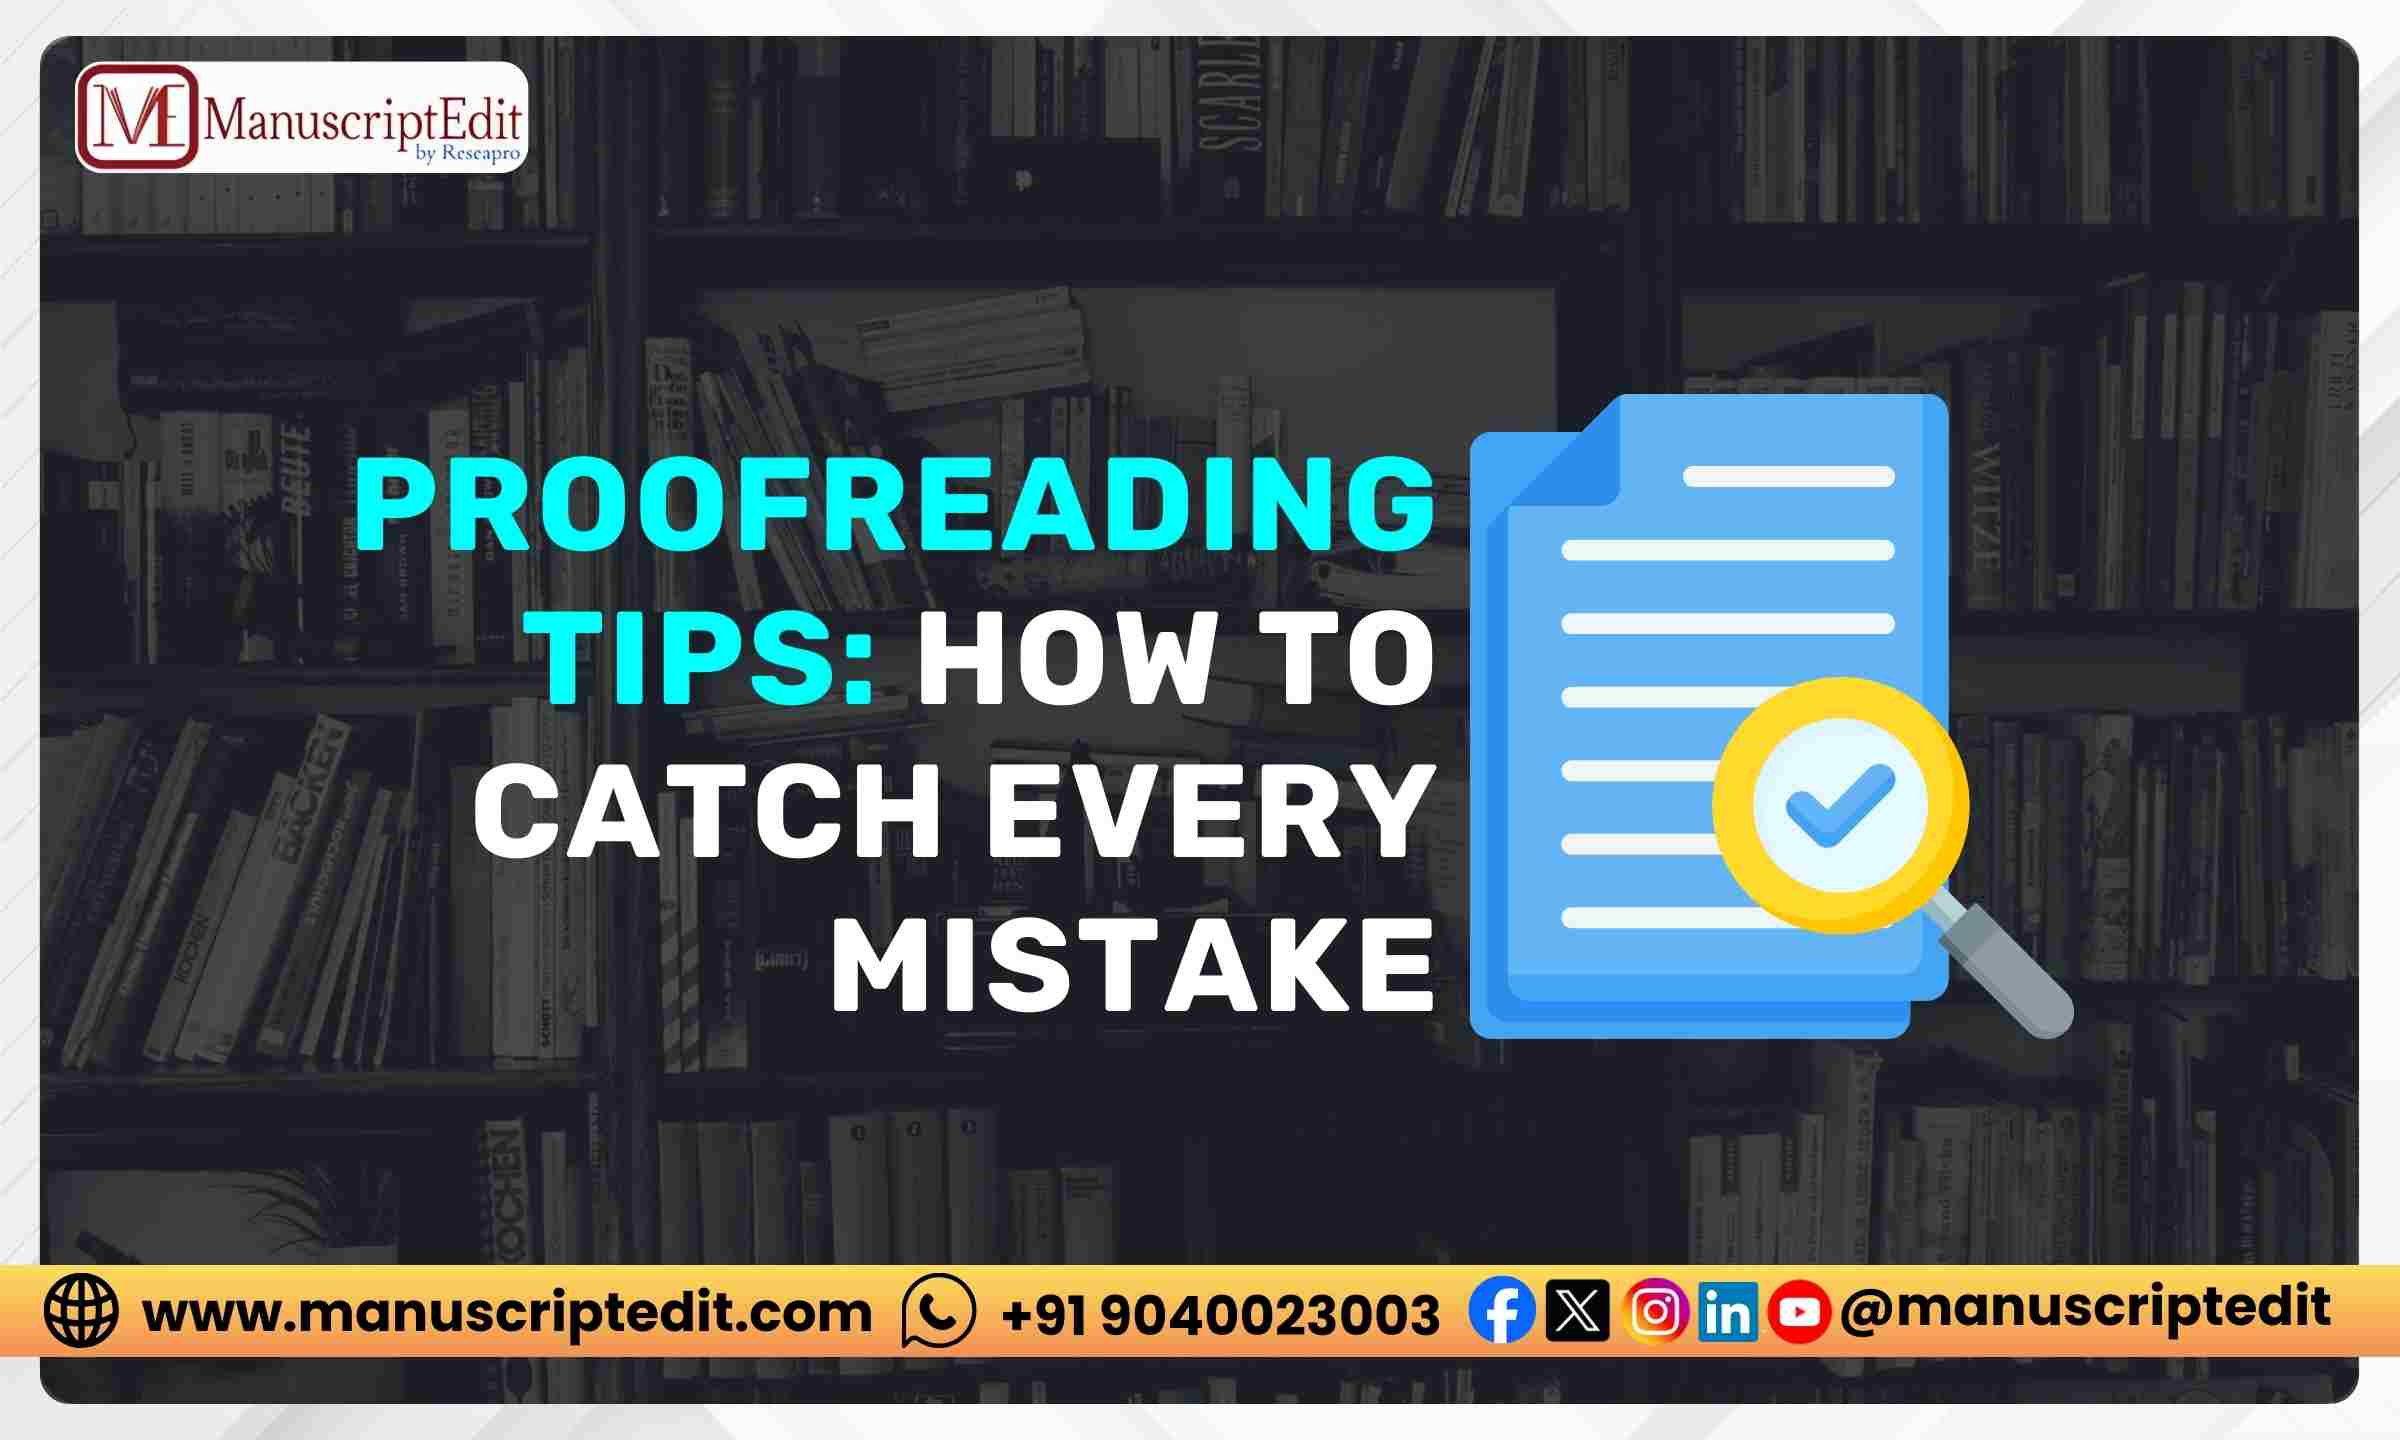 Proofreading Tips: How to Catch Every Mistake